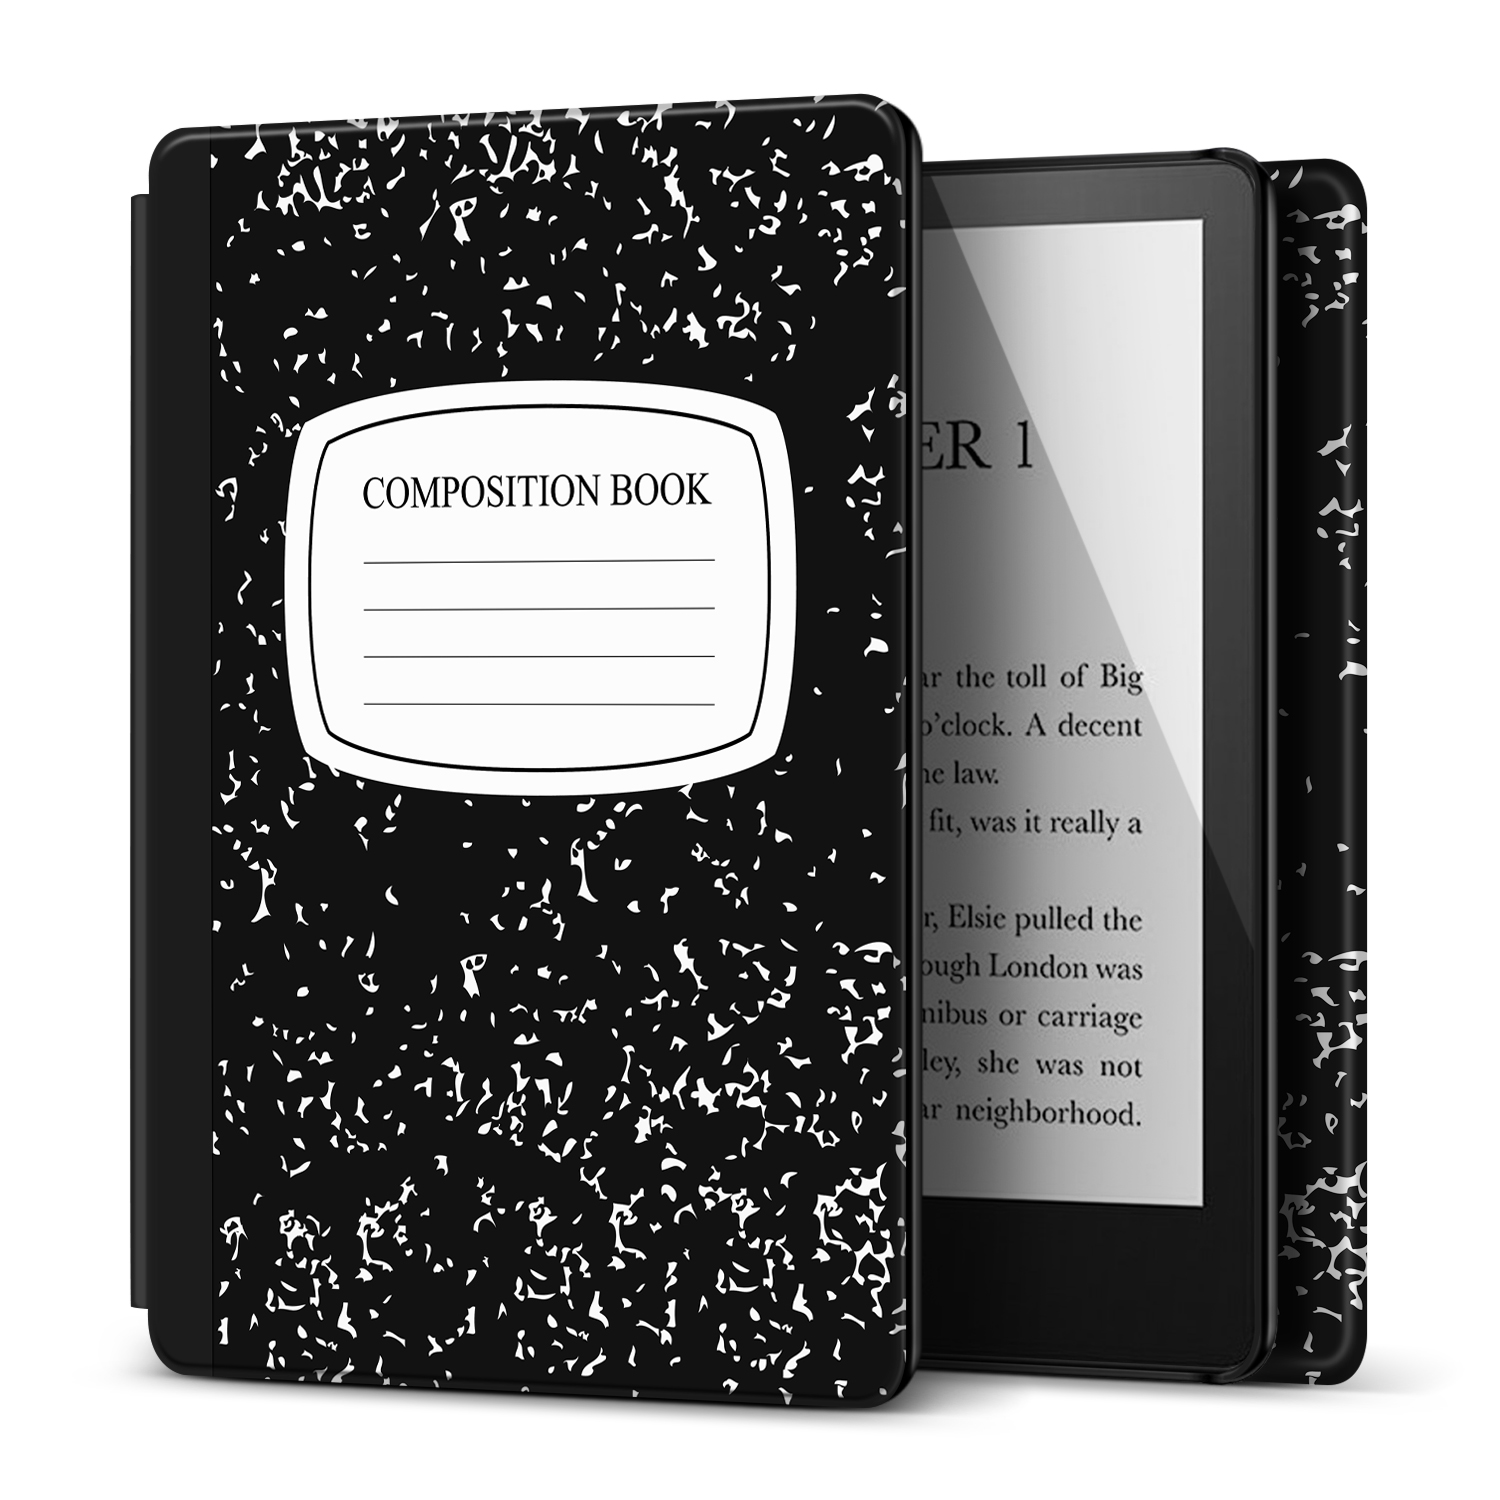 Case for 6.8" Kindle Paperwhite 11th Generation 2021 / Kindle Paperwhite Signature Edition, PU Leather Cover, Protective Sleeve Folio Case for Kindle E-Reader with Auto Sleep/Wake, Composition Book